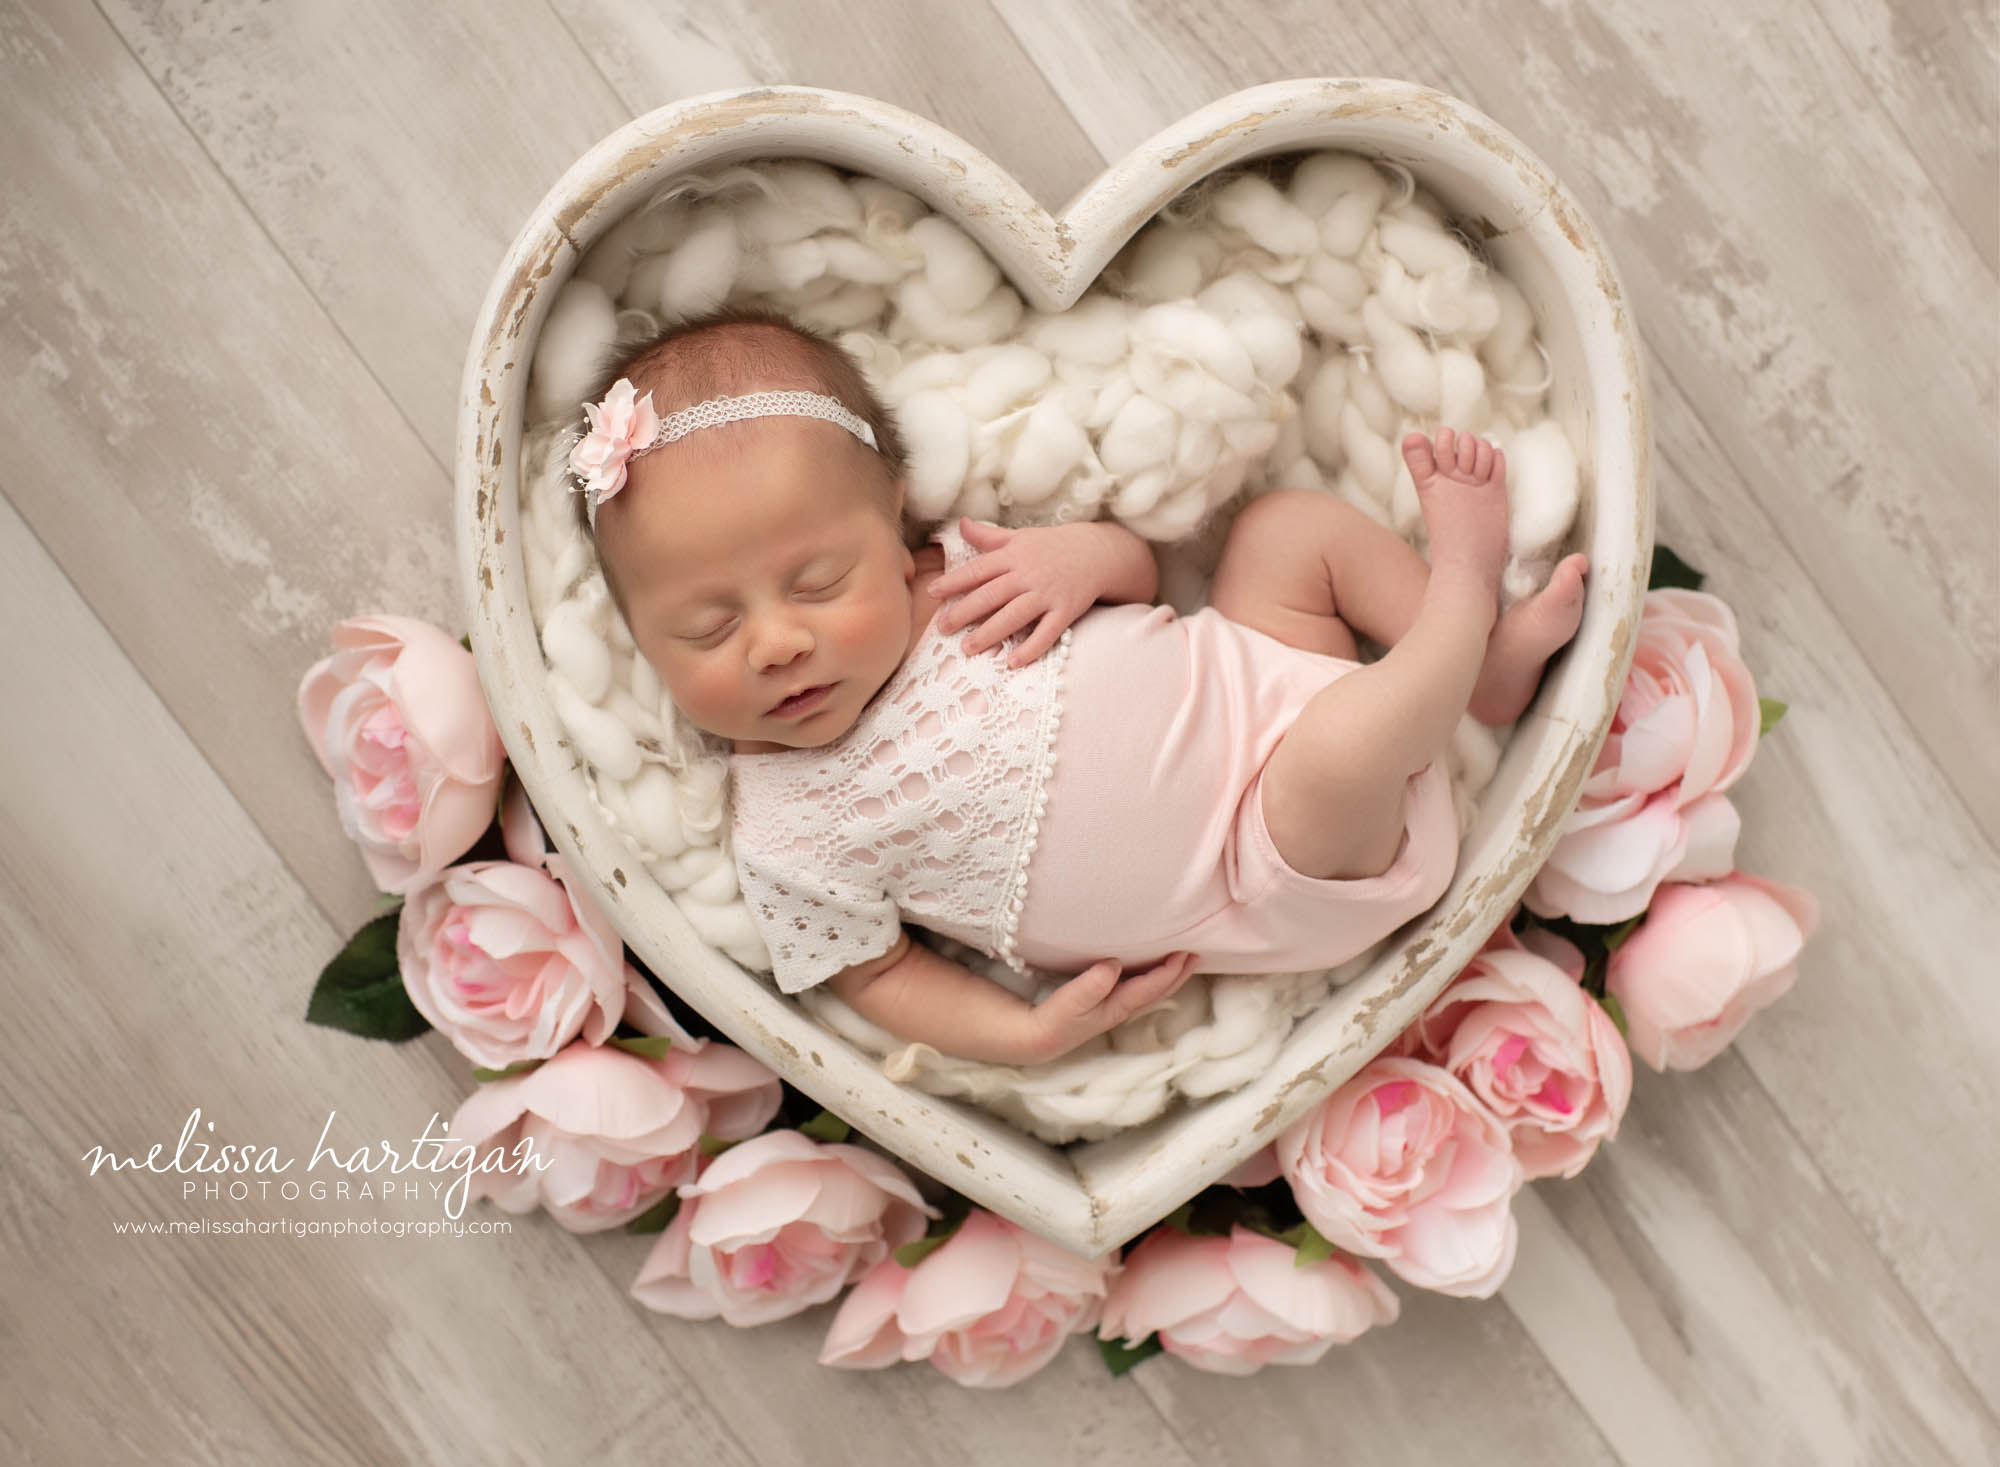 Baby girl posed in white wooden heart shaped prop with rose flora around the sides CT newborn Photograpy